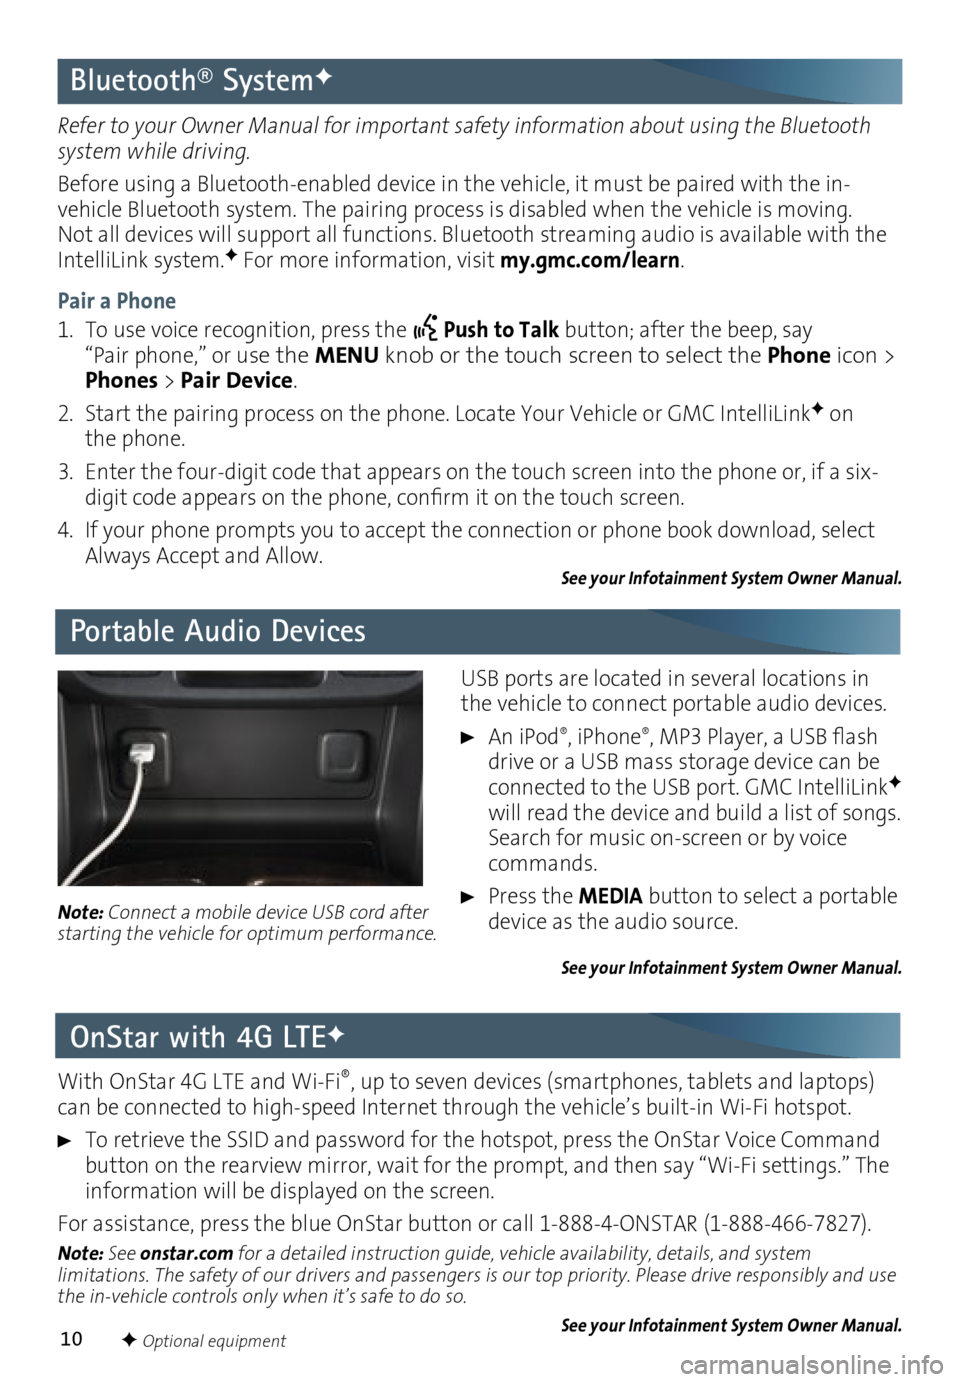 GMC CANYON 2016  Get To Know Guide 10
Bluetooth® SystemF
Portable Audio Devices
OnStar with 4G LTE
F
Refer to your Owner Manual for important safety information about using the Bluetooth 
system while driving.
Before using a Bluetooth